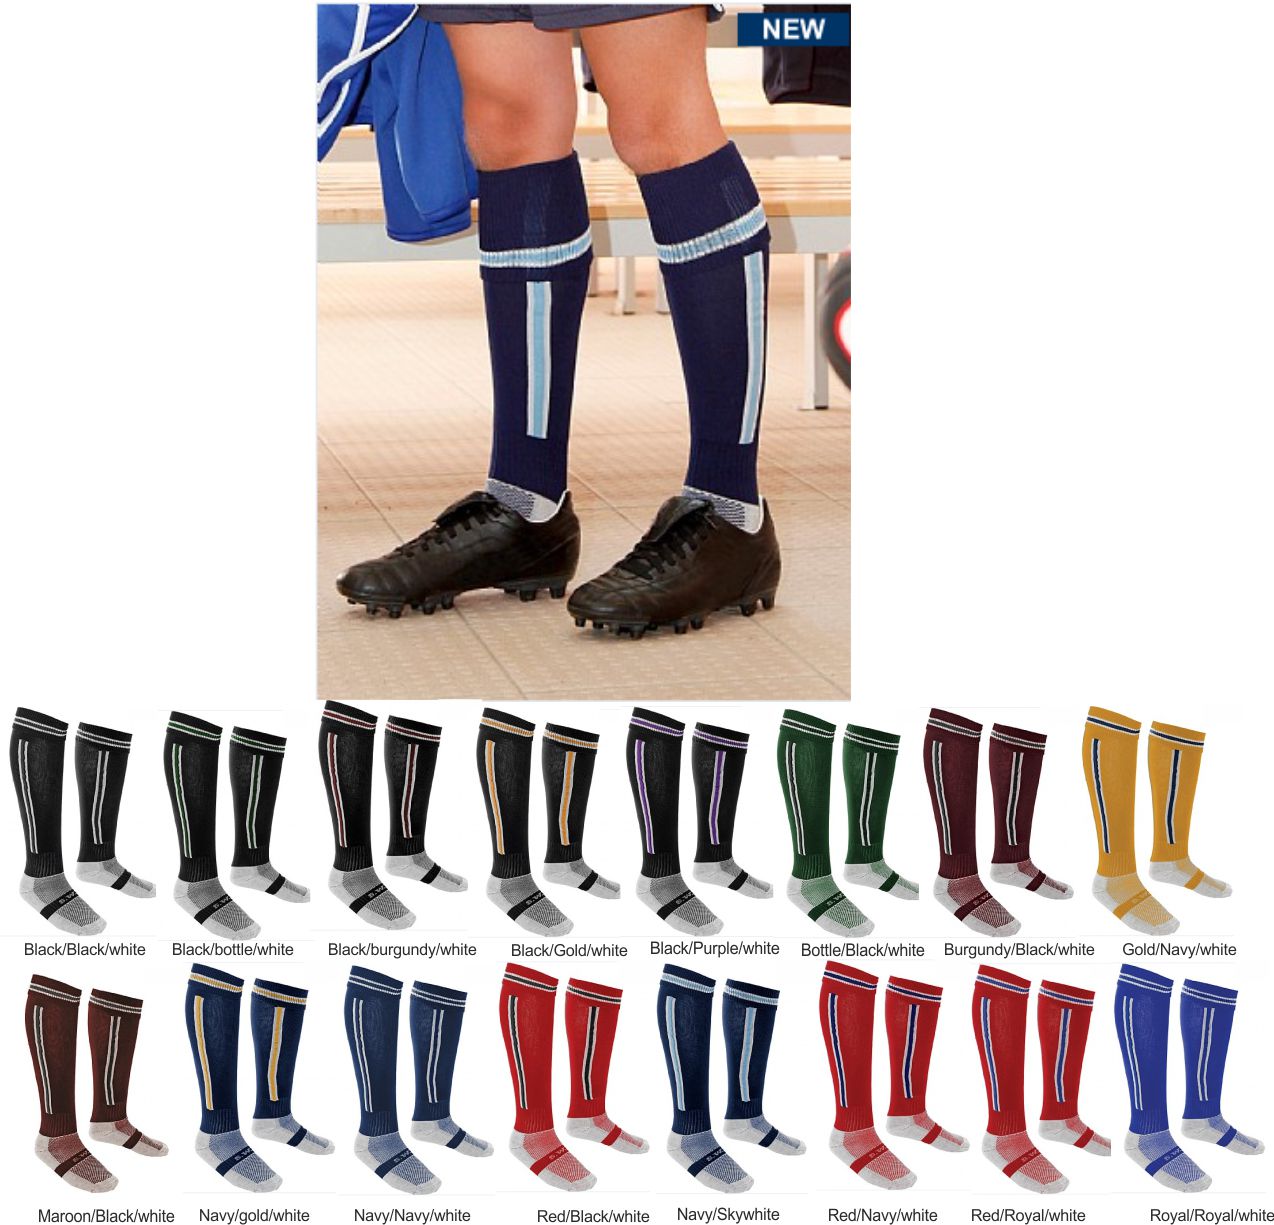 Sports Socks : Ark Trading, Corporate Clothing & Regalia from the Specialist